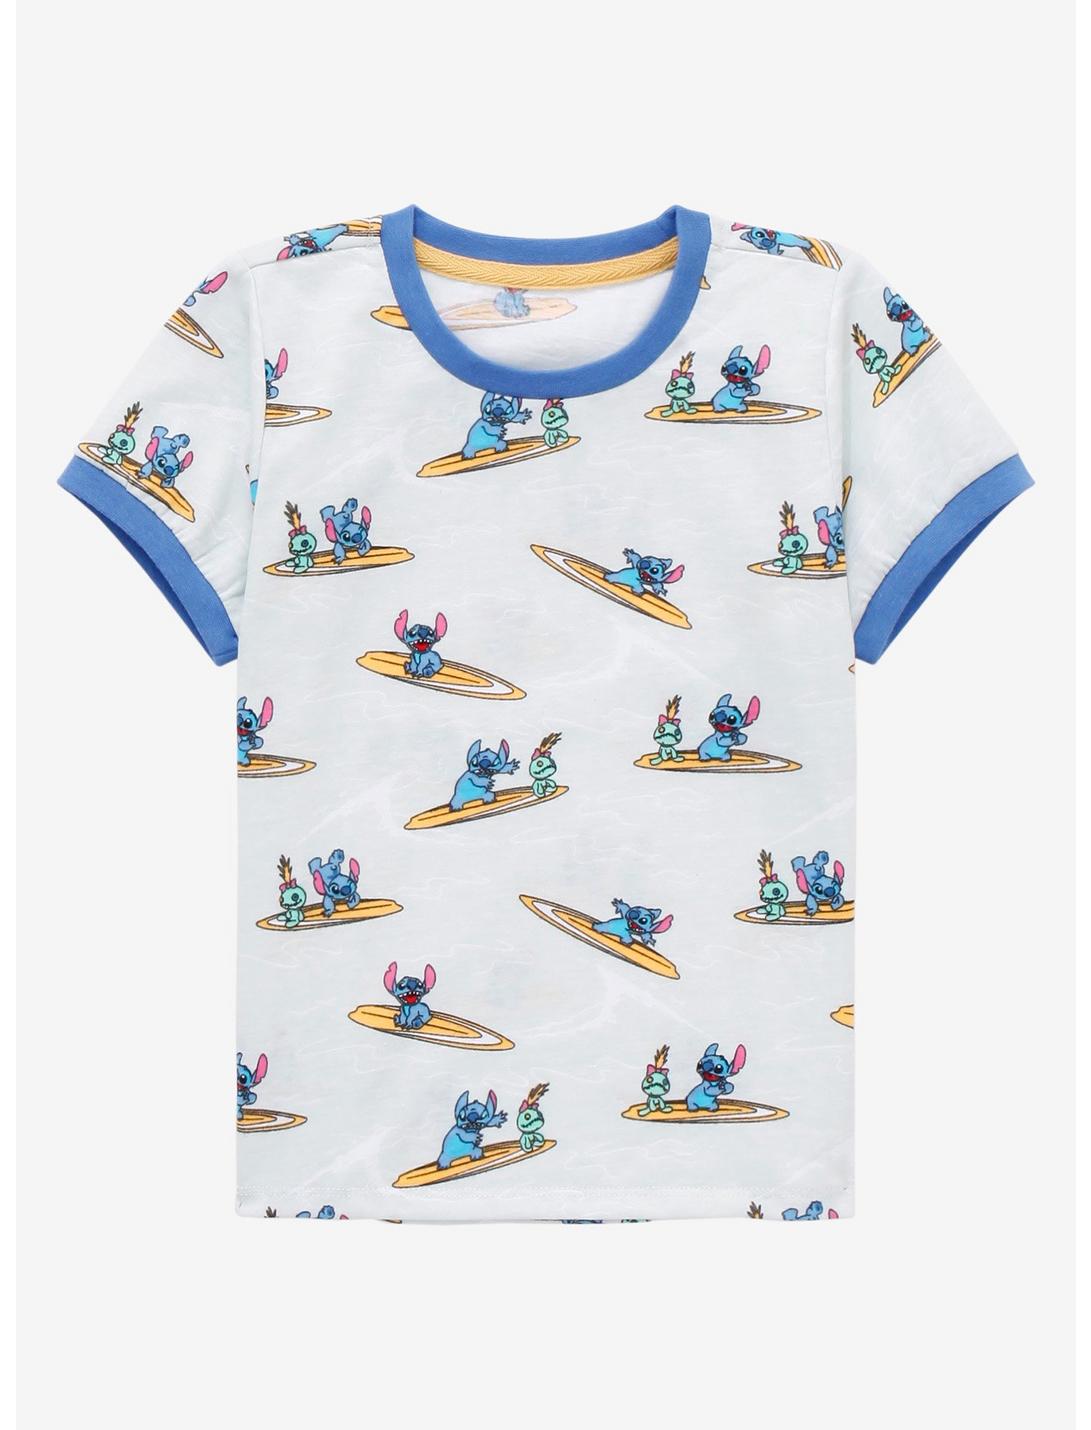 Disney Lilo & Stitch Surfing with Stitch & Scrump Toddler Ringer T-Shirt - BoxLunch Exclusive, LIGHT BLUE, hi-res